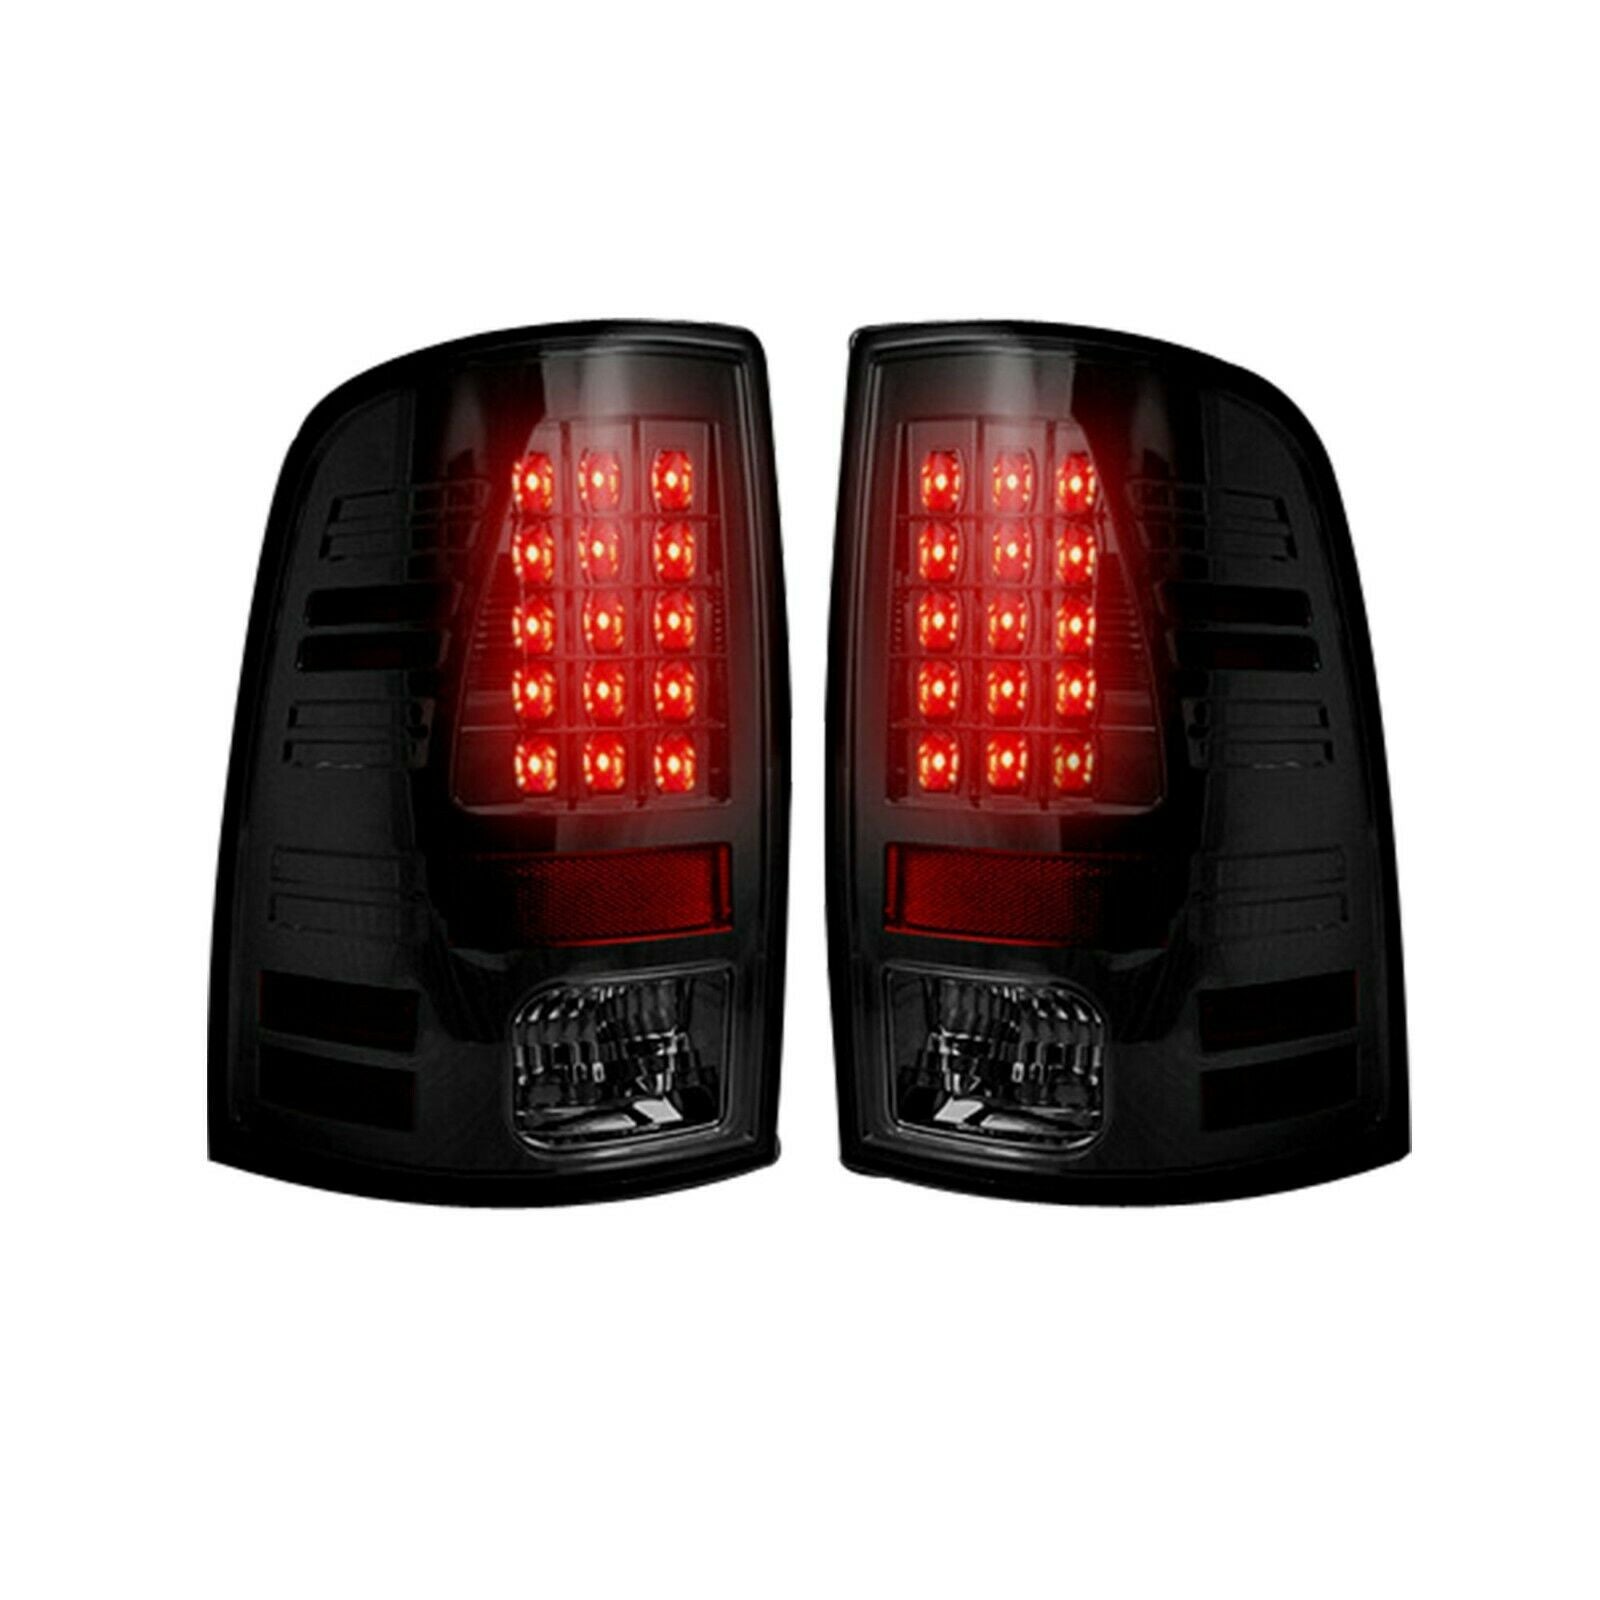 Recon SMOKED LED Tail Lights Fits 2009-2014 Dodge RAM - 264169BK